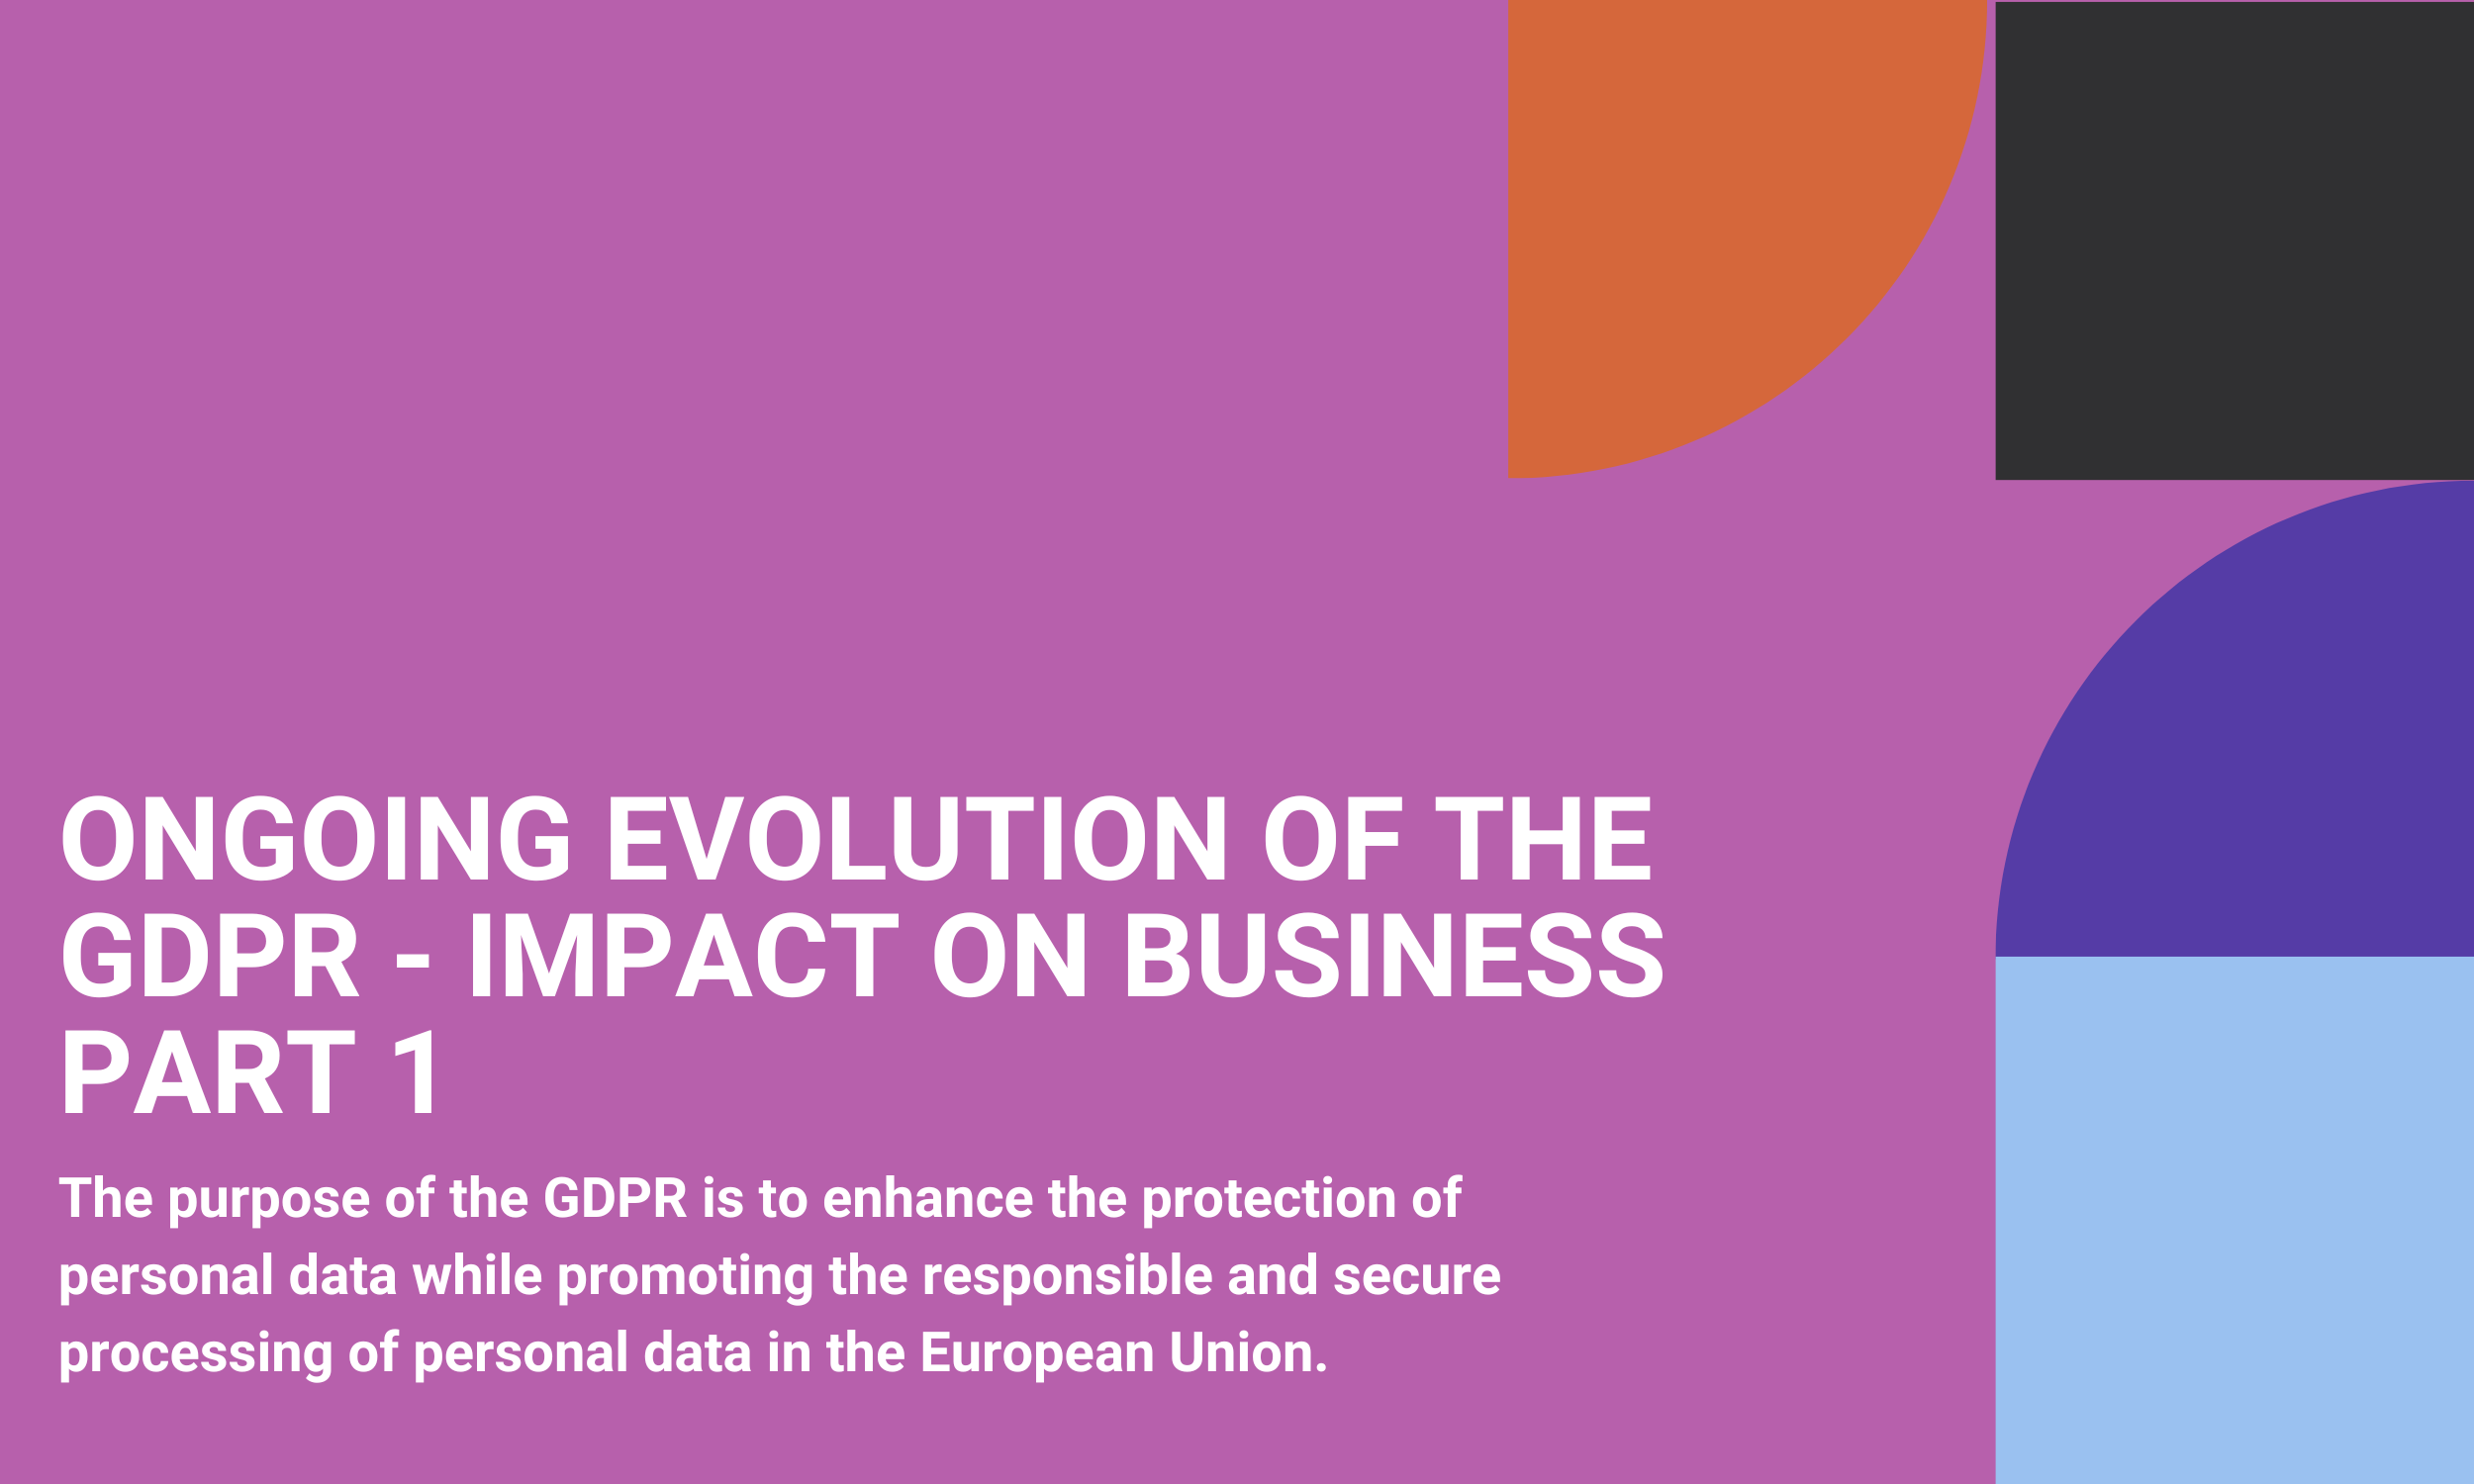 Ongoing Evolution of the GDPR - Impact on Business Part 1